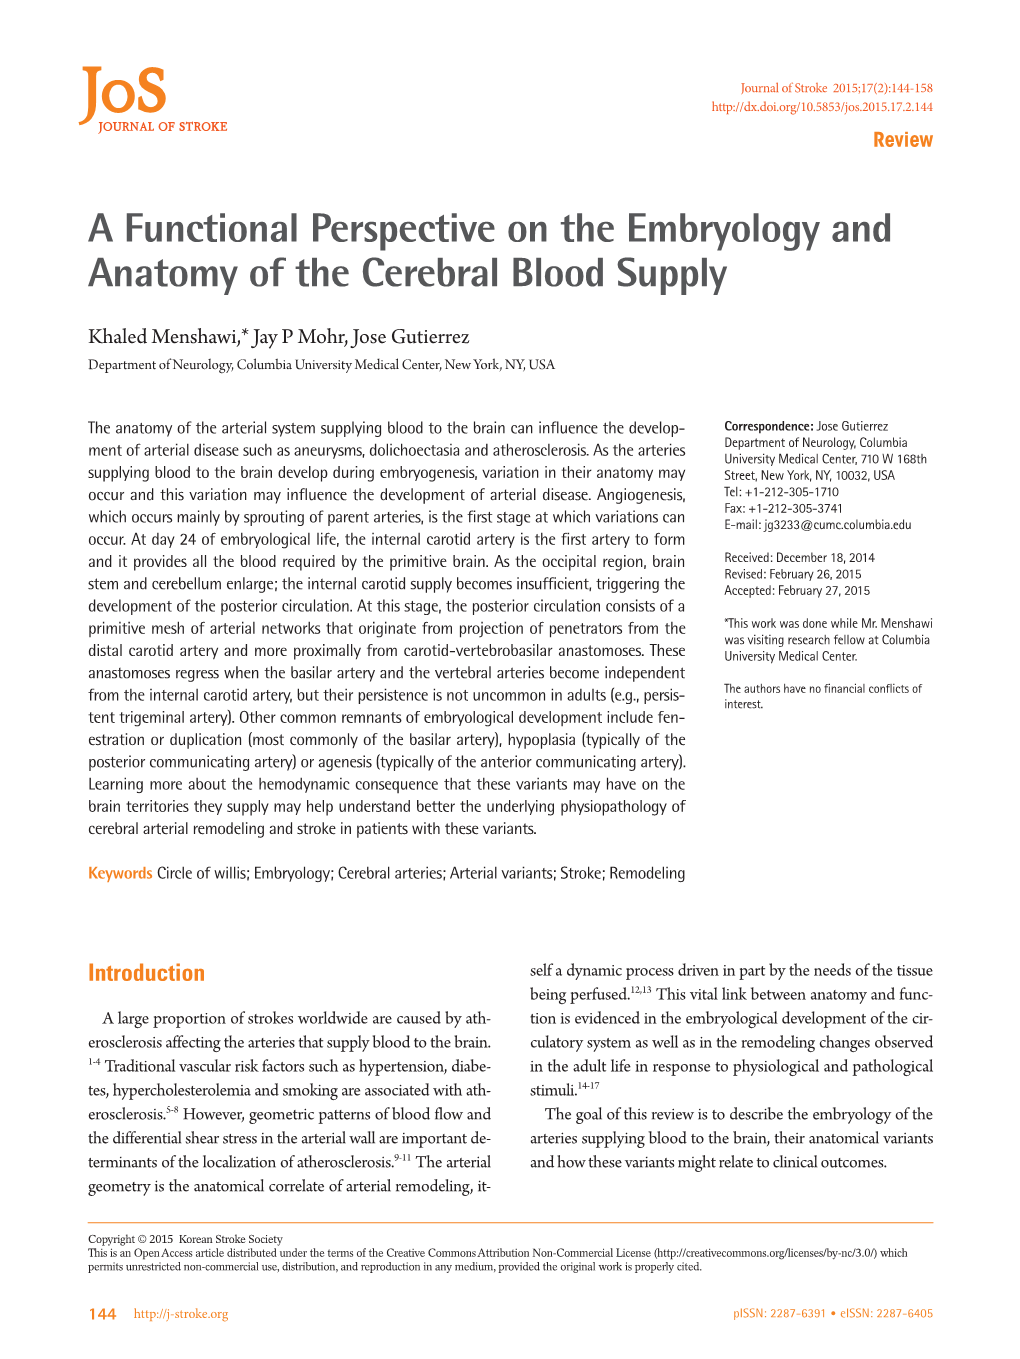 A Functional Perspective on the Embryology and Anatomy of the Cerebral Blood Supply